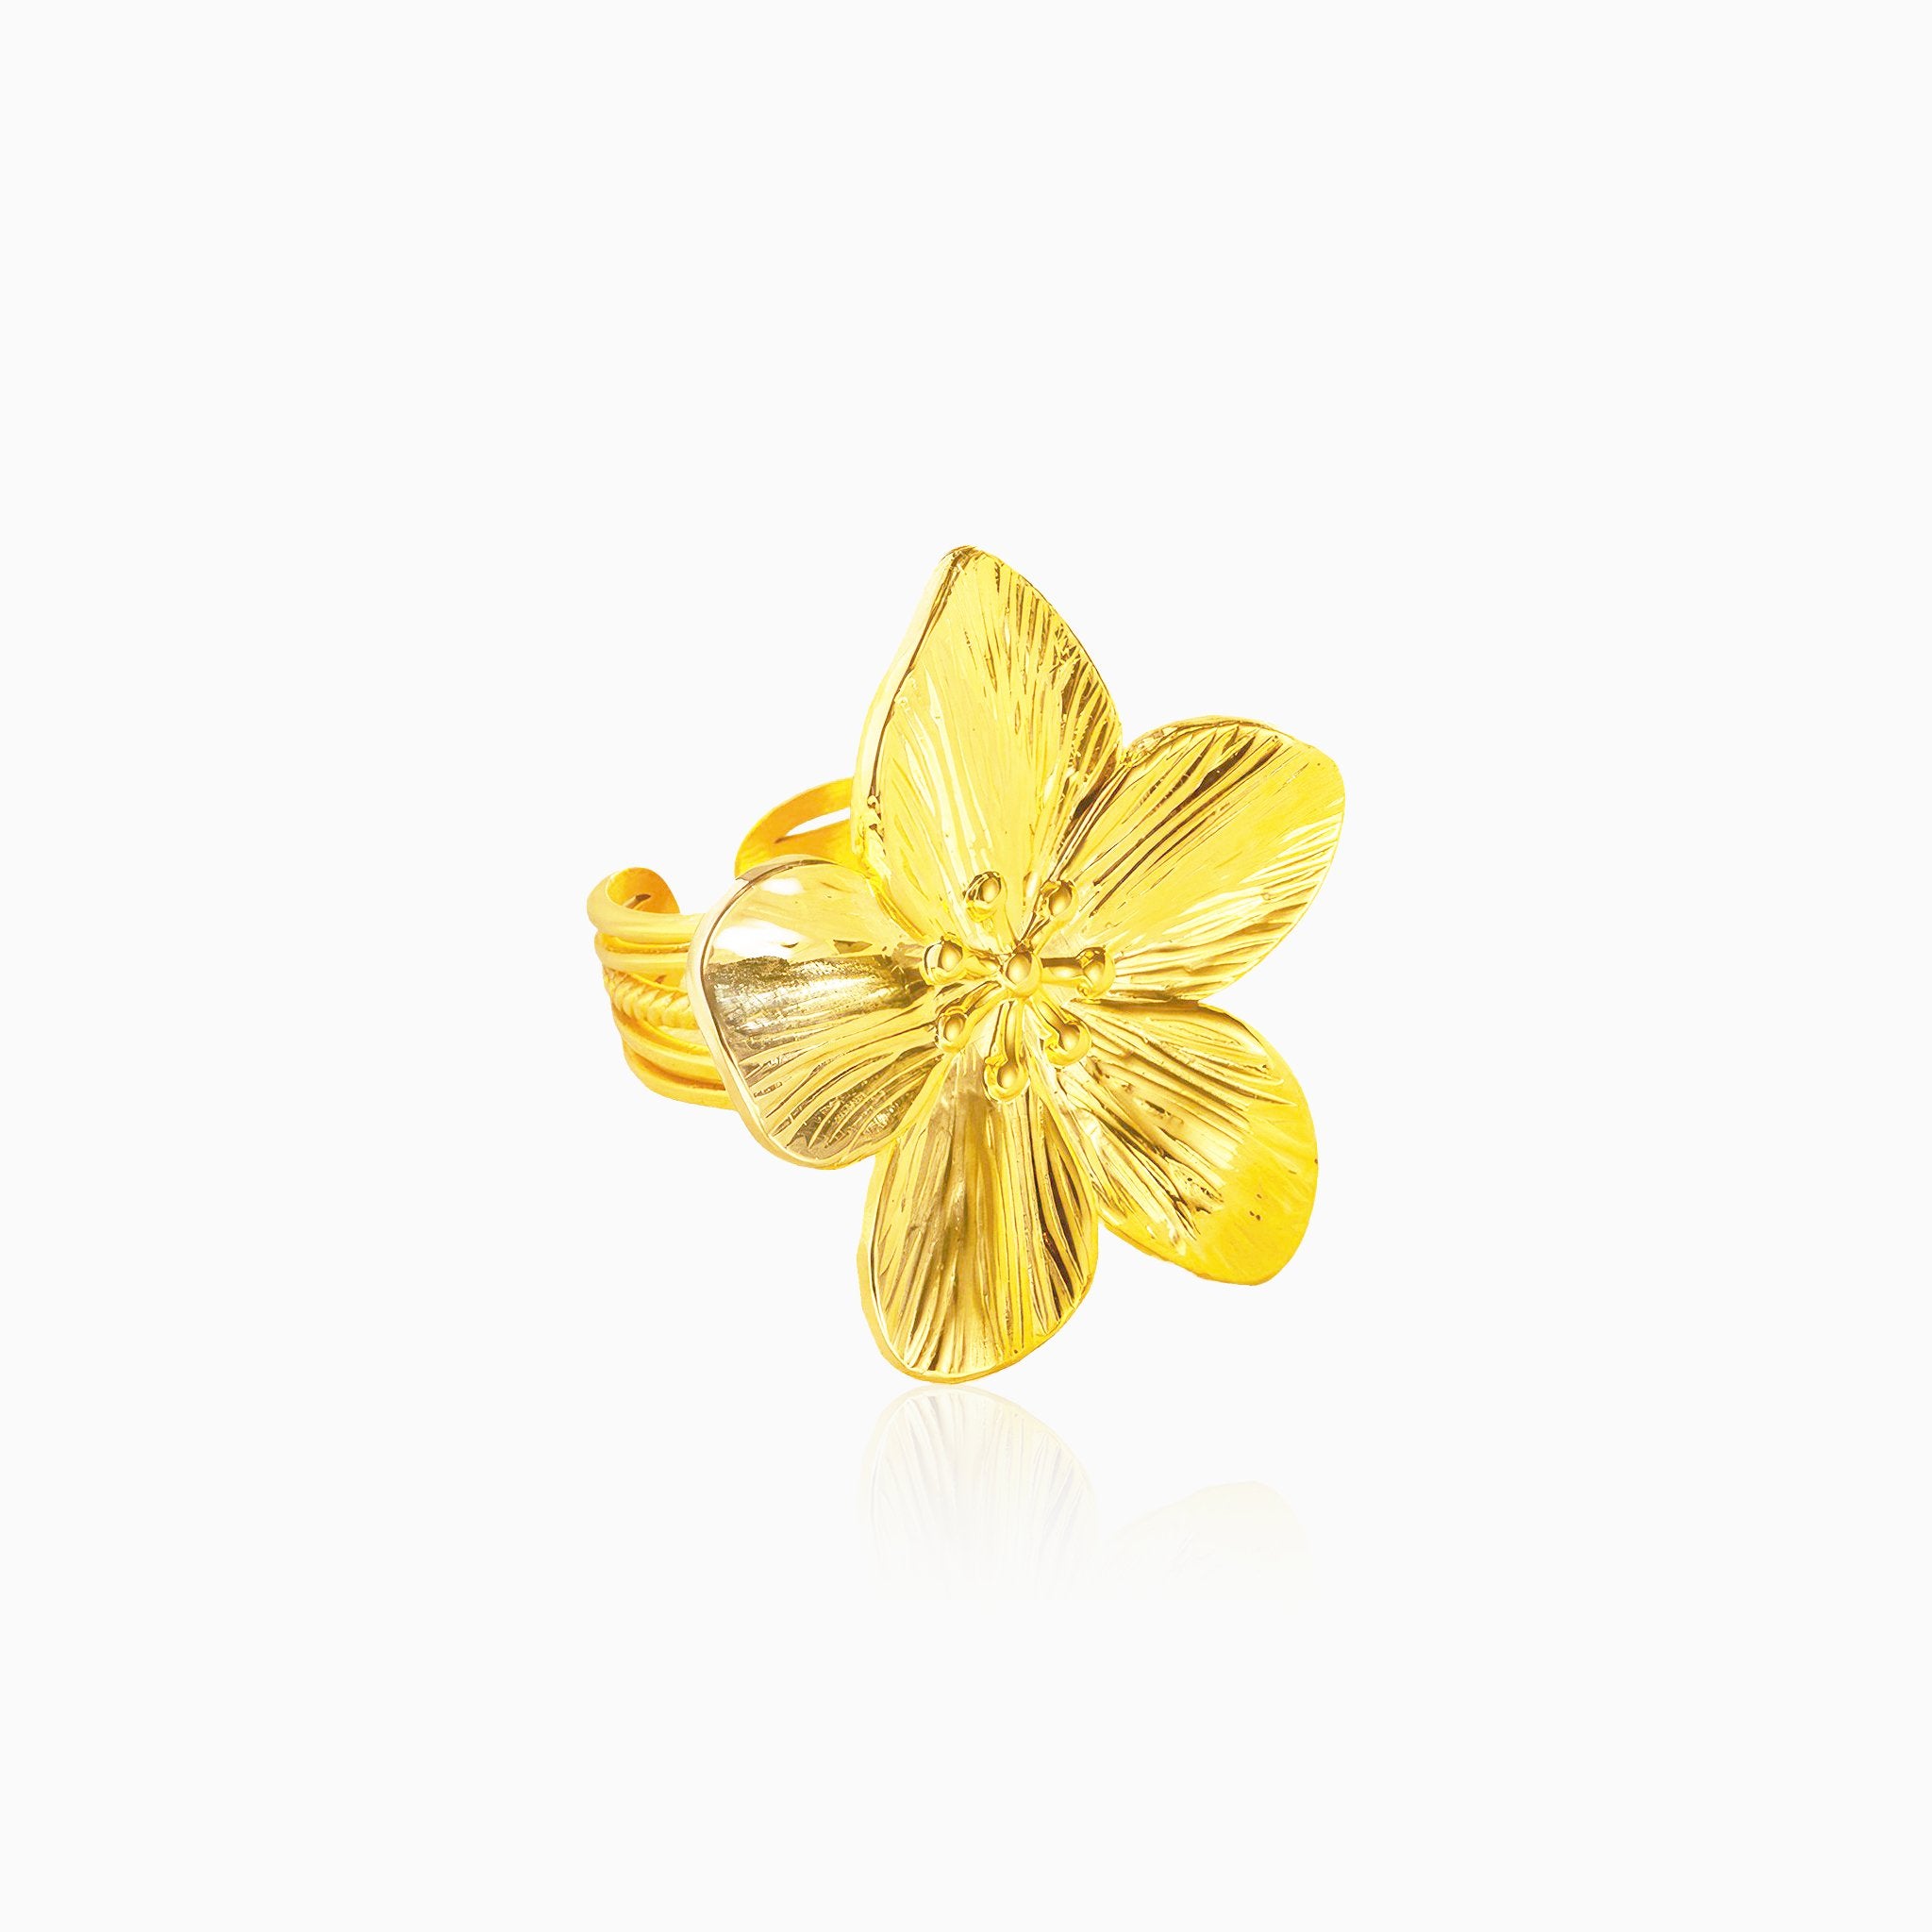 Vintage Flower Versatile Ring - Nobbier - Ring - 18K Gold And Titanium PVD Coated Jewelry